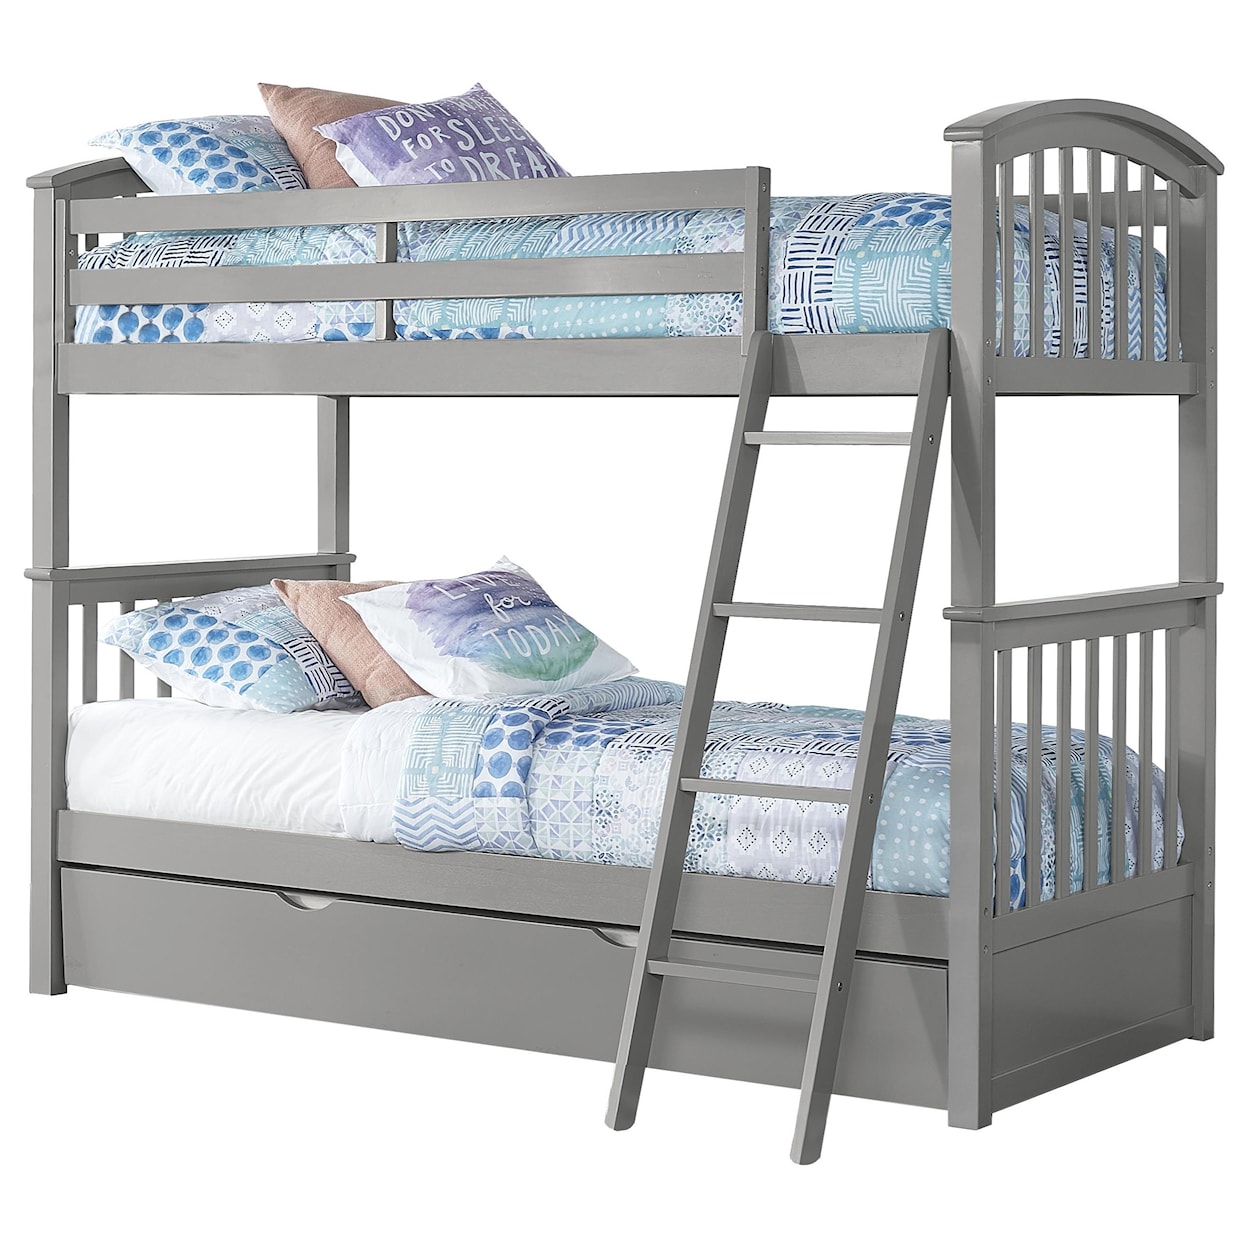 Hillsdale Schoolhouse Twin Bunk Bed w/ Trundle